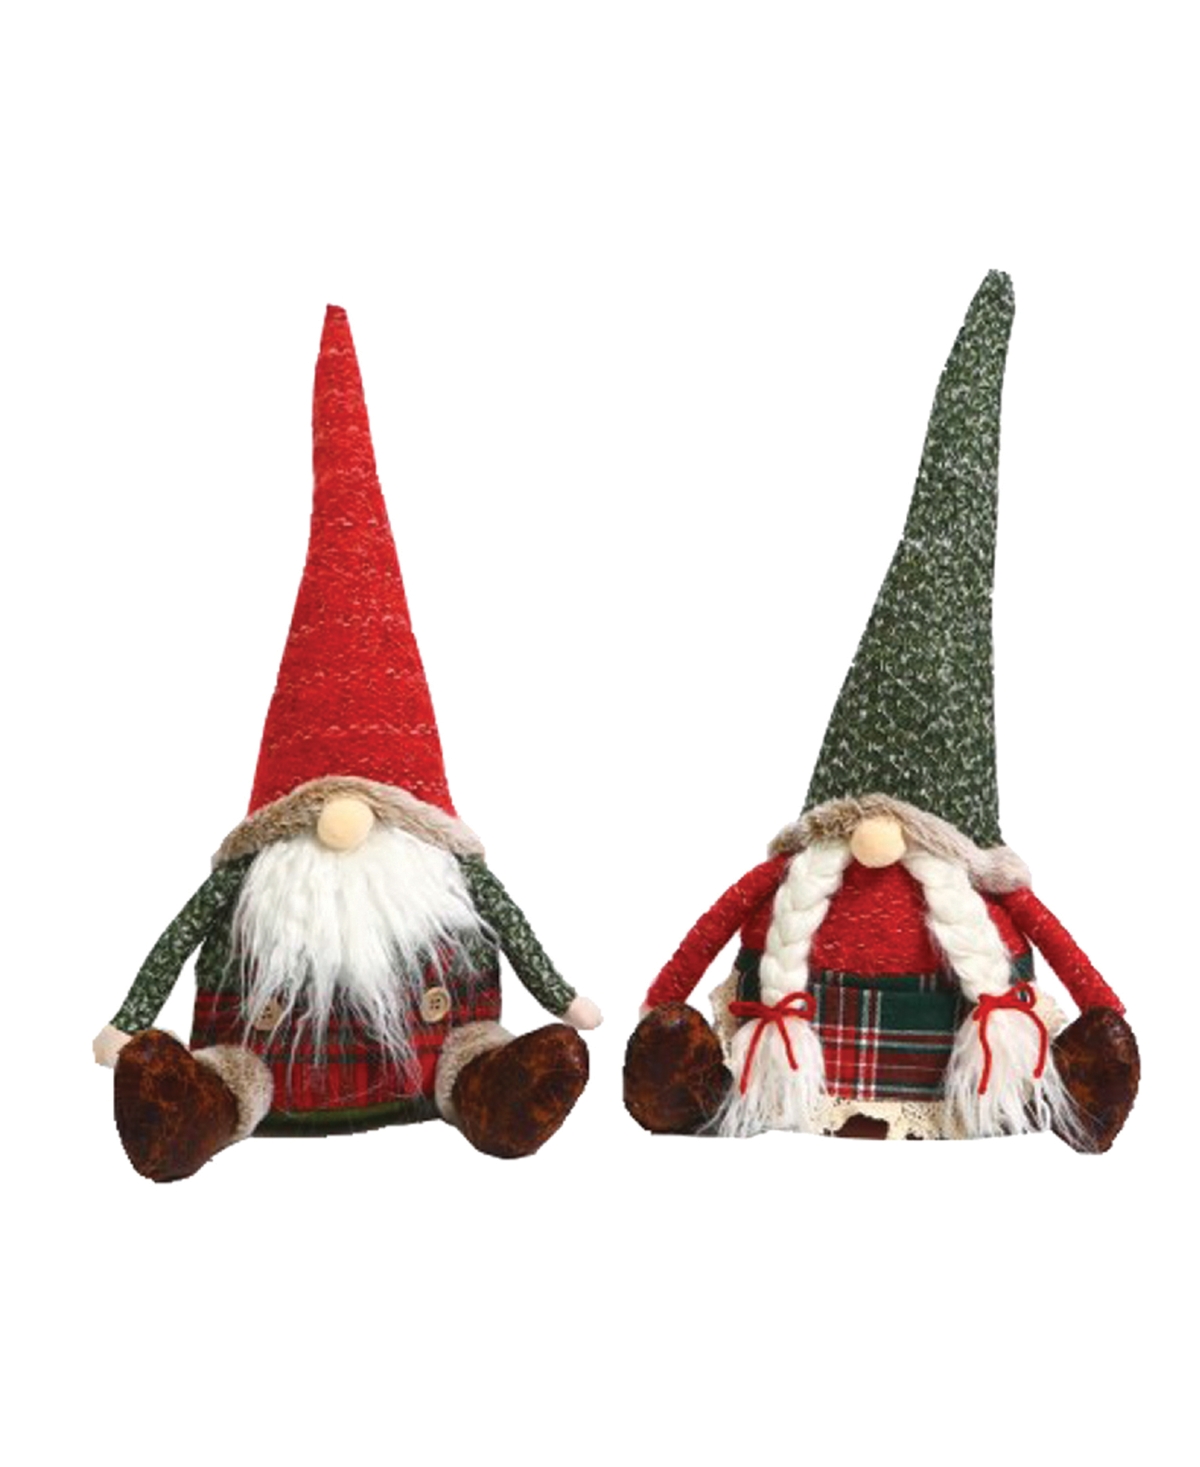 9" Country Gnomes, Set of 2 - Red